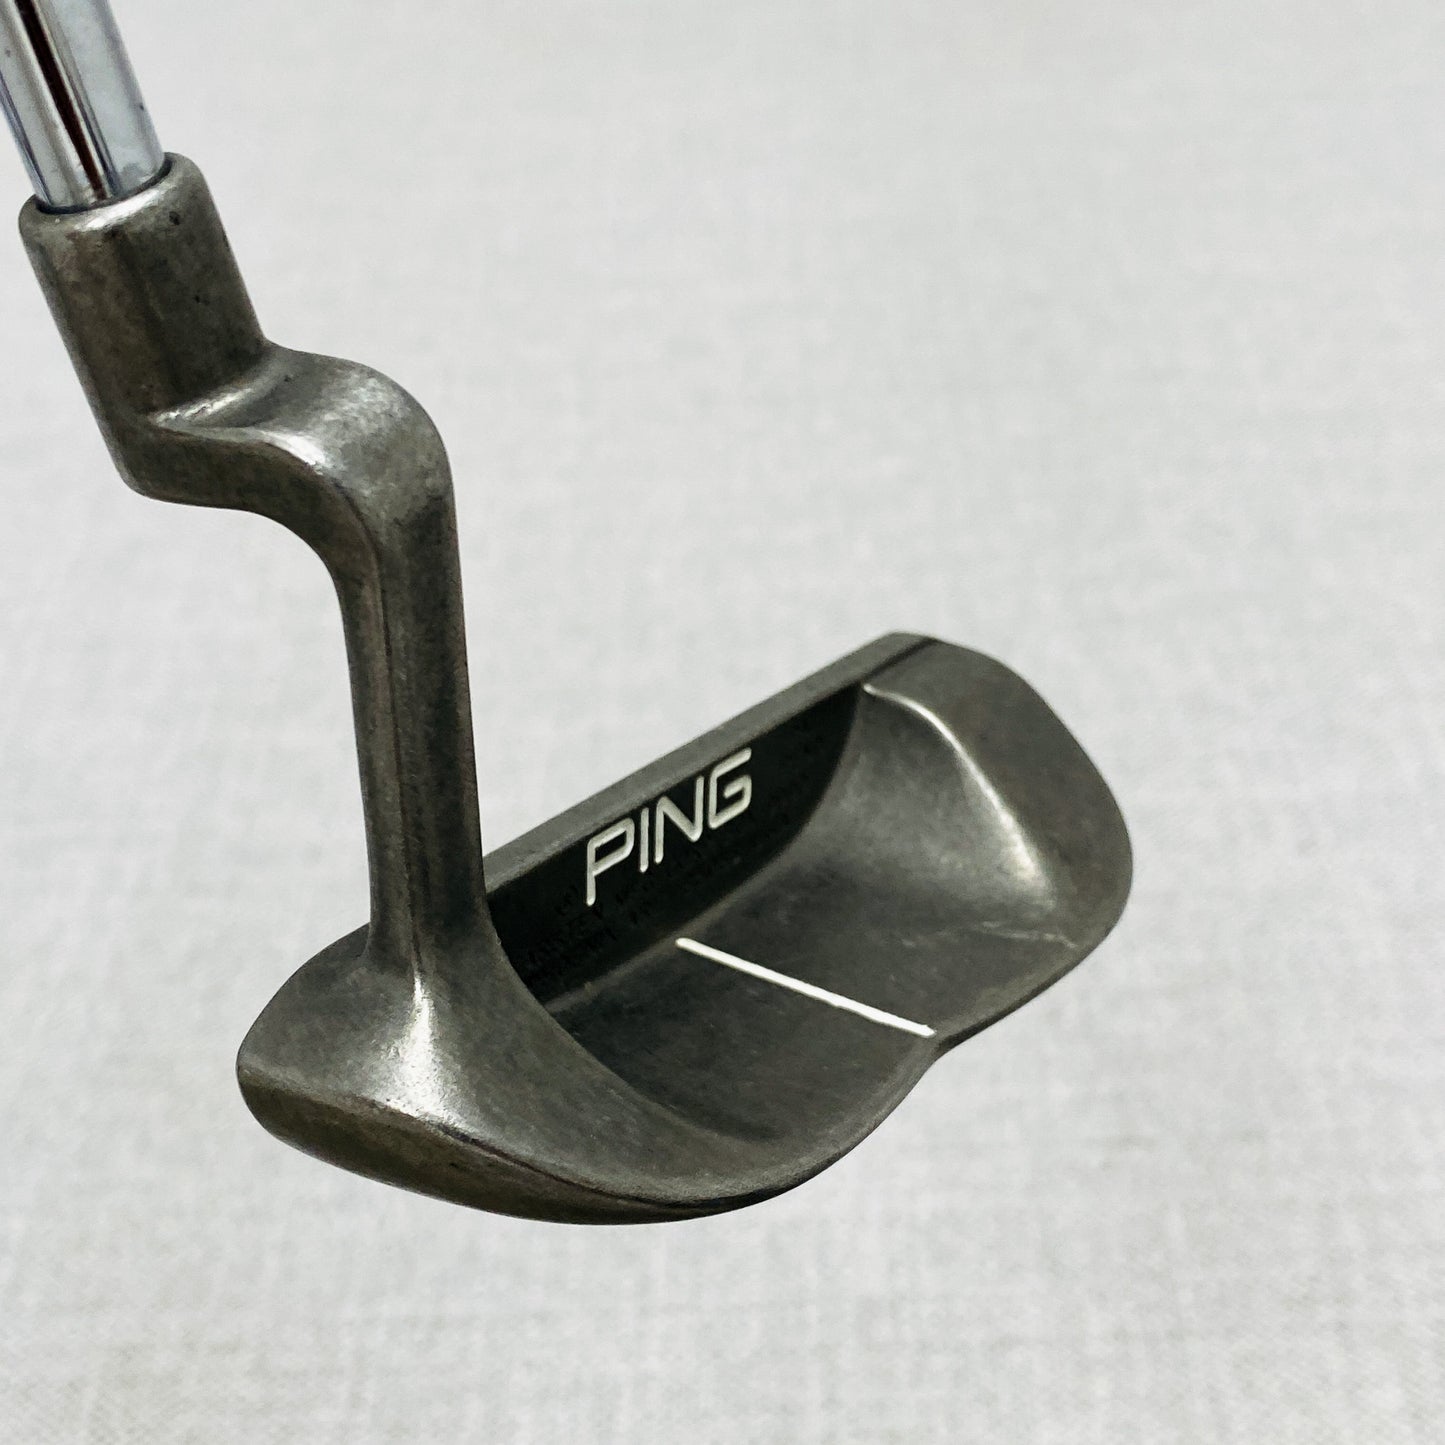 PING B61 Stainless Putter. 34 inch - Very Good Condition # T995